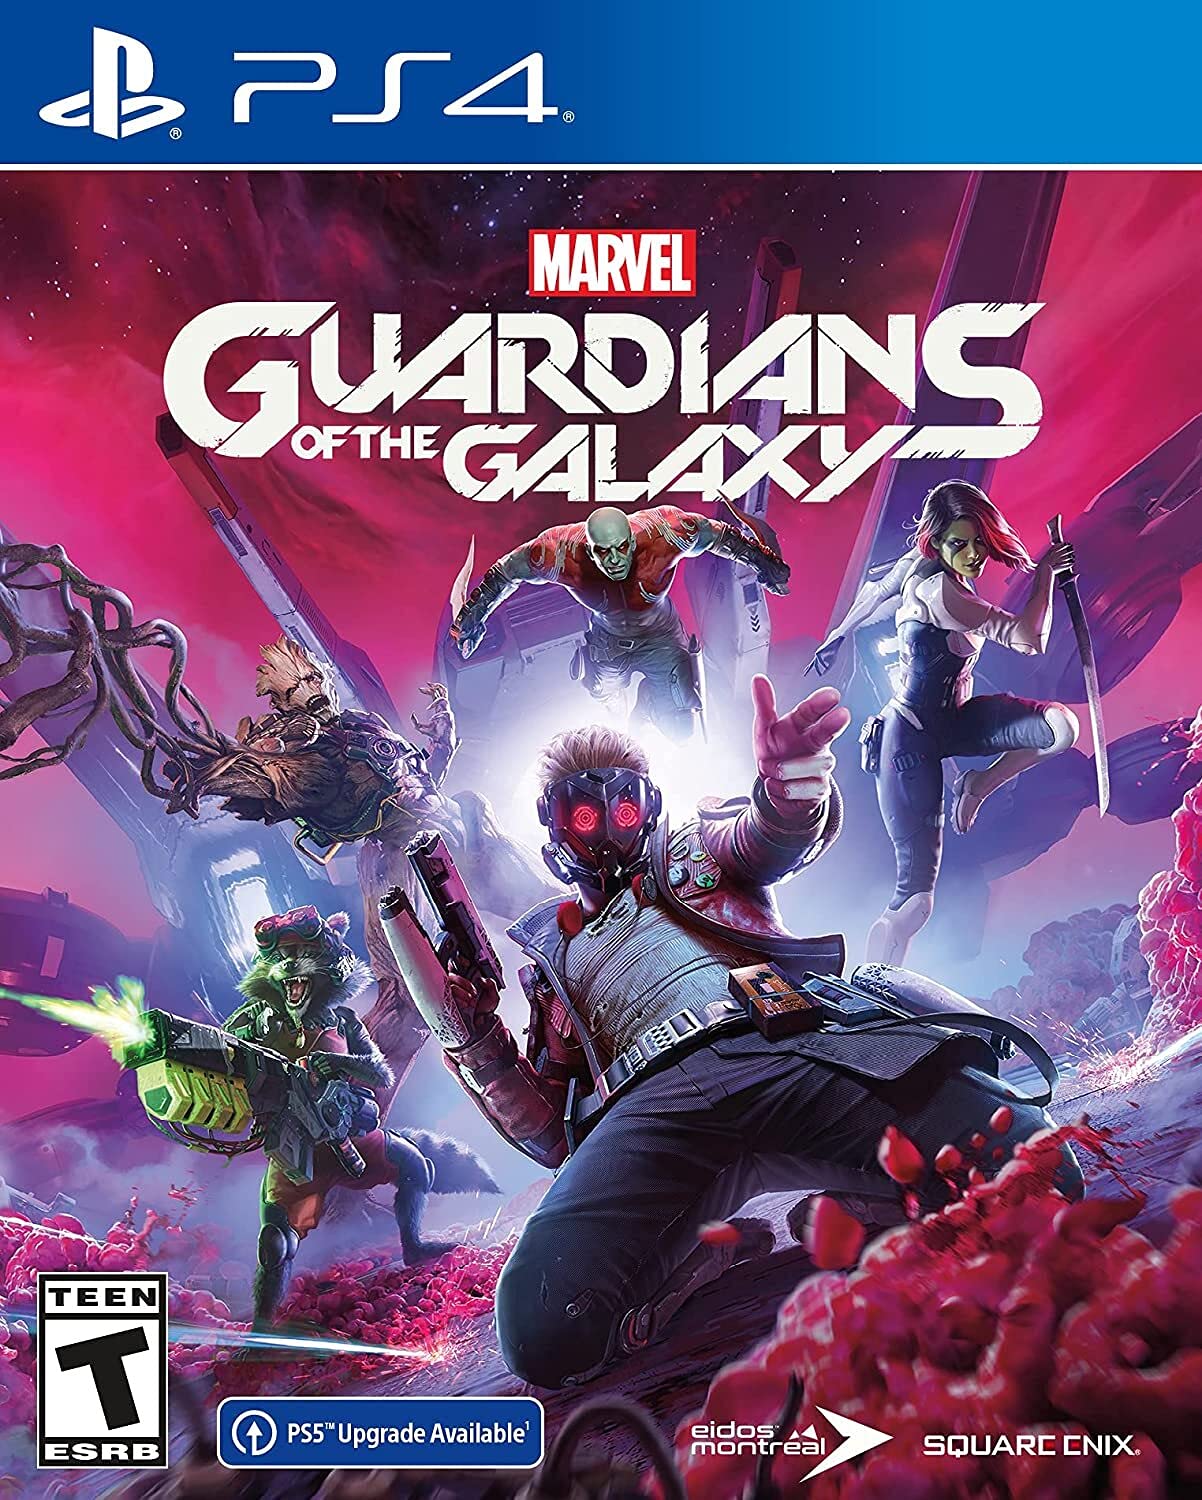 Marvel Guardians of the Galaxy - PS4 Game